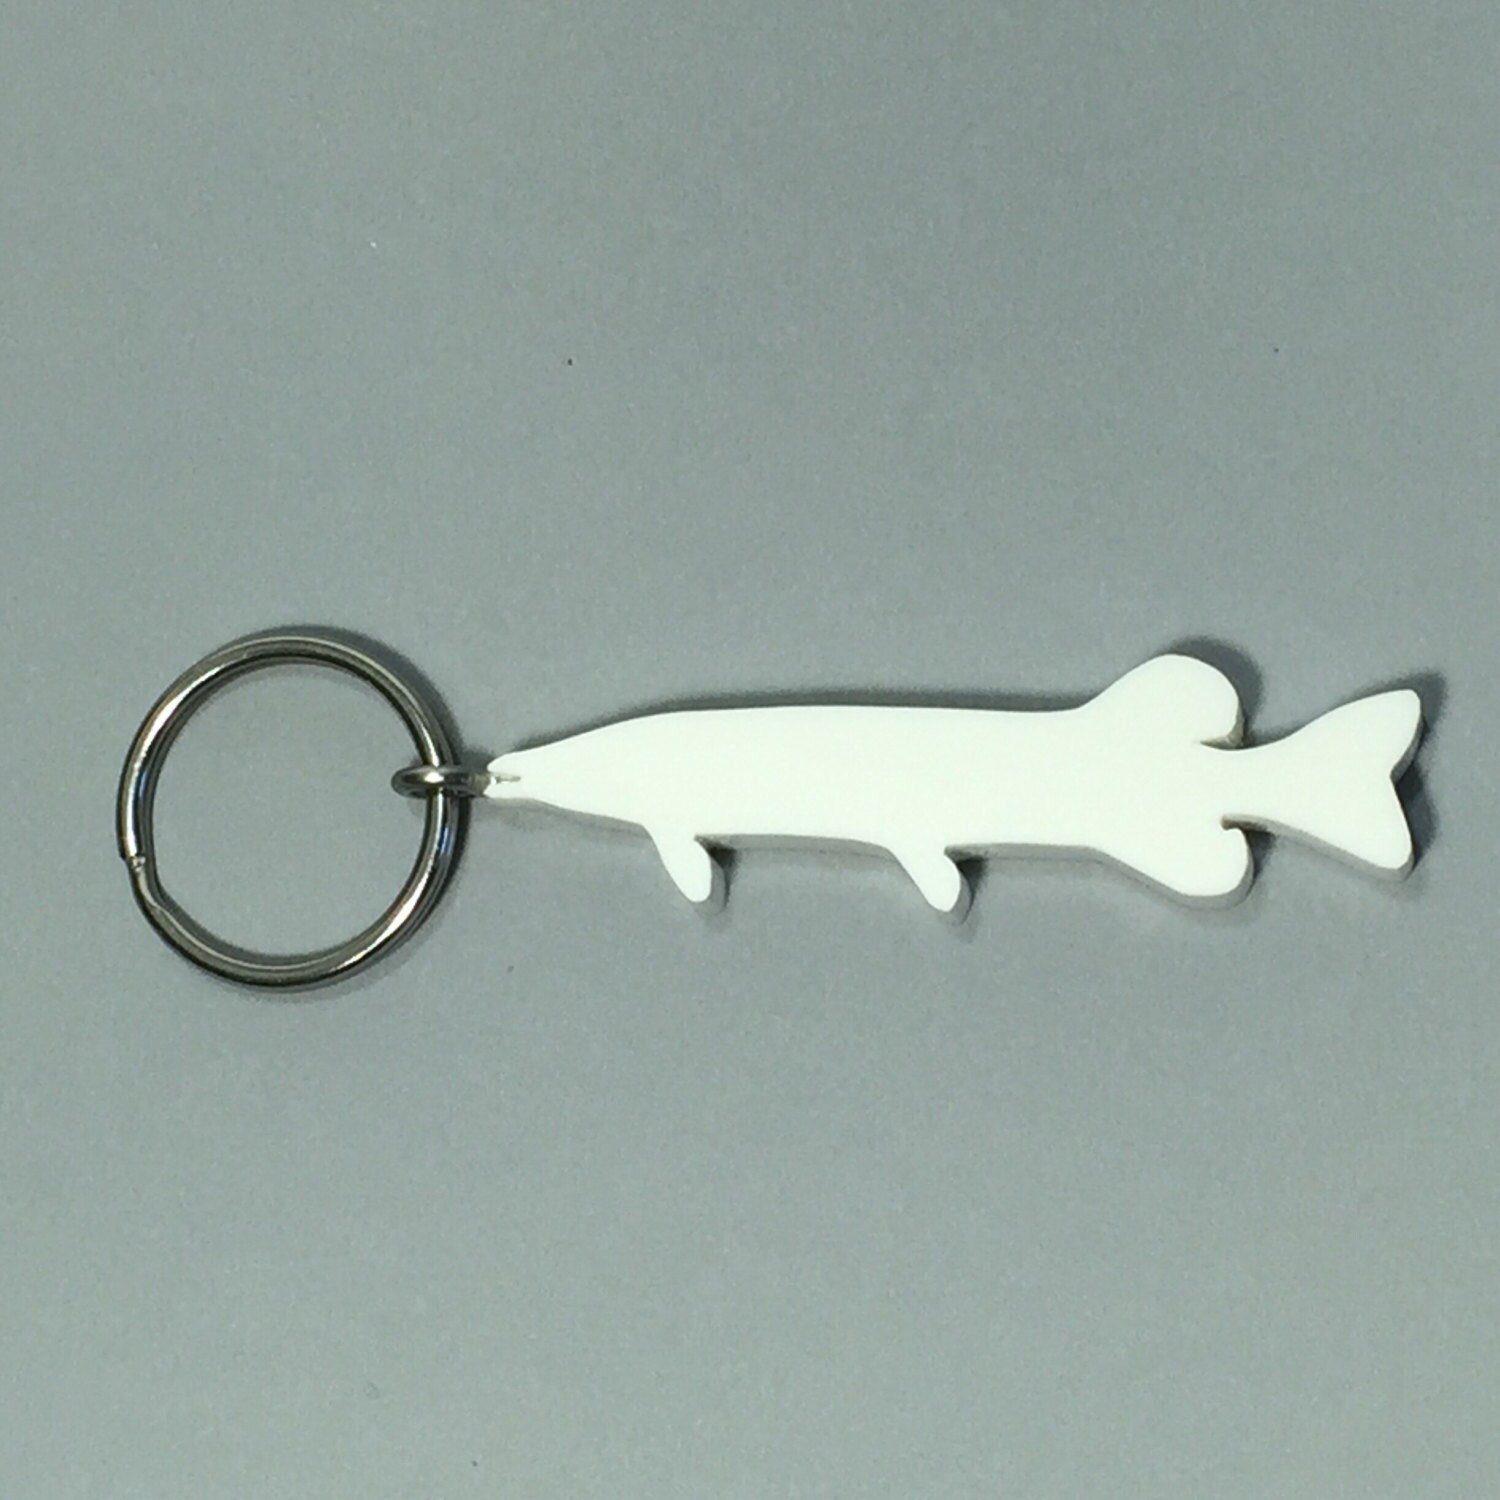 Pike Keychain Recycled Materials Stainless Steel Keychain Eco Friendly  Gifts for Fishermen 